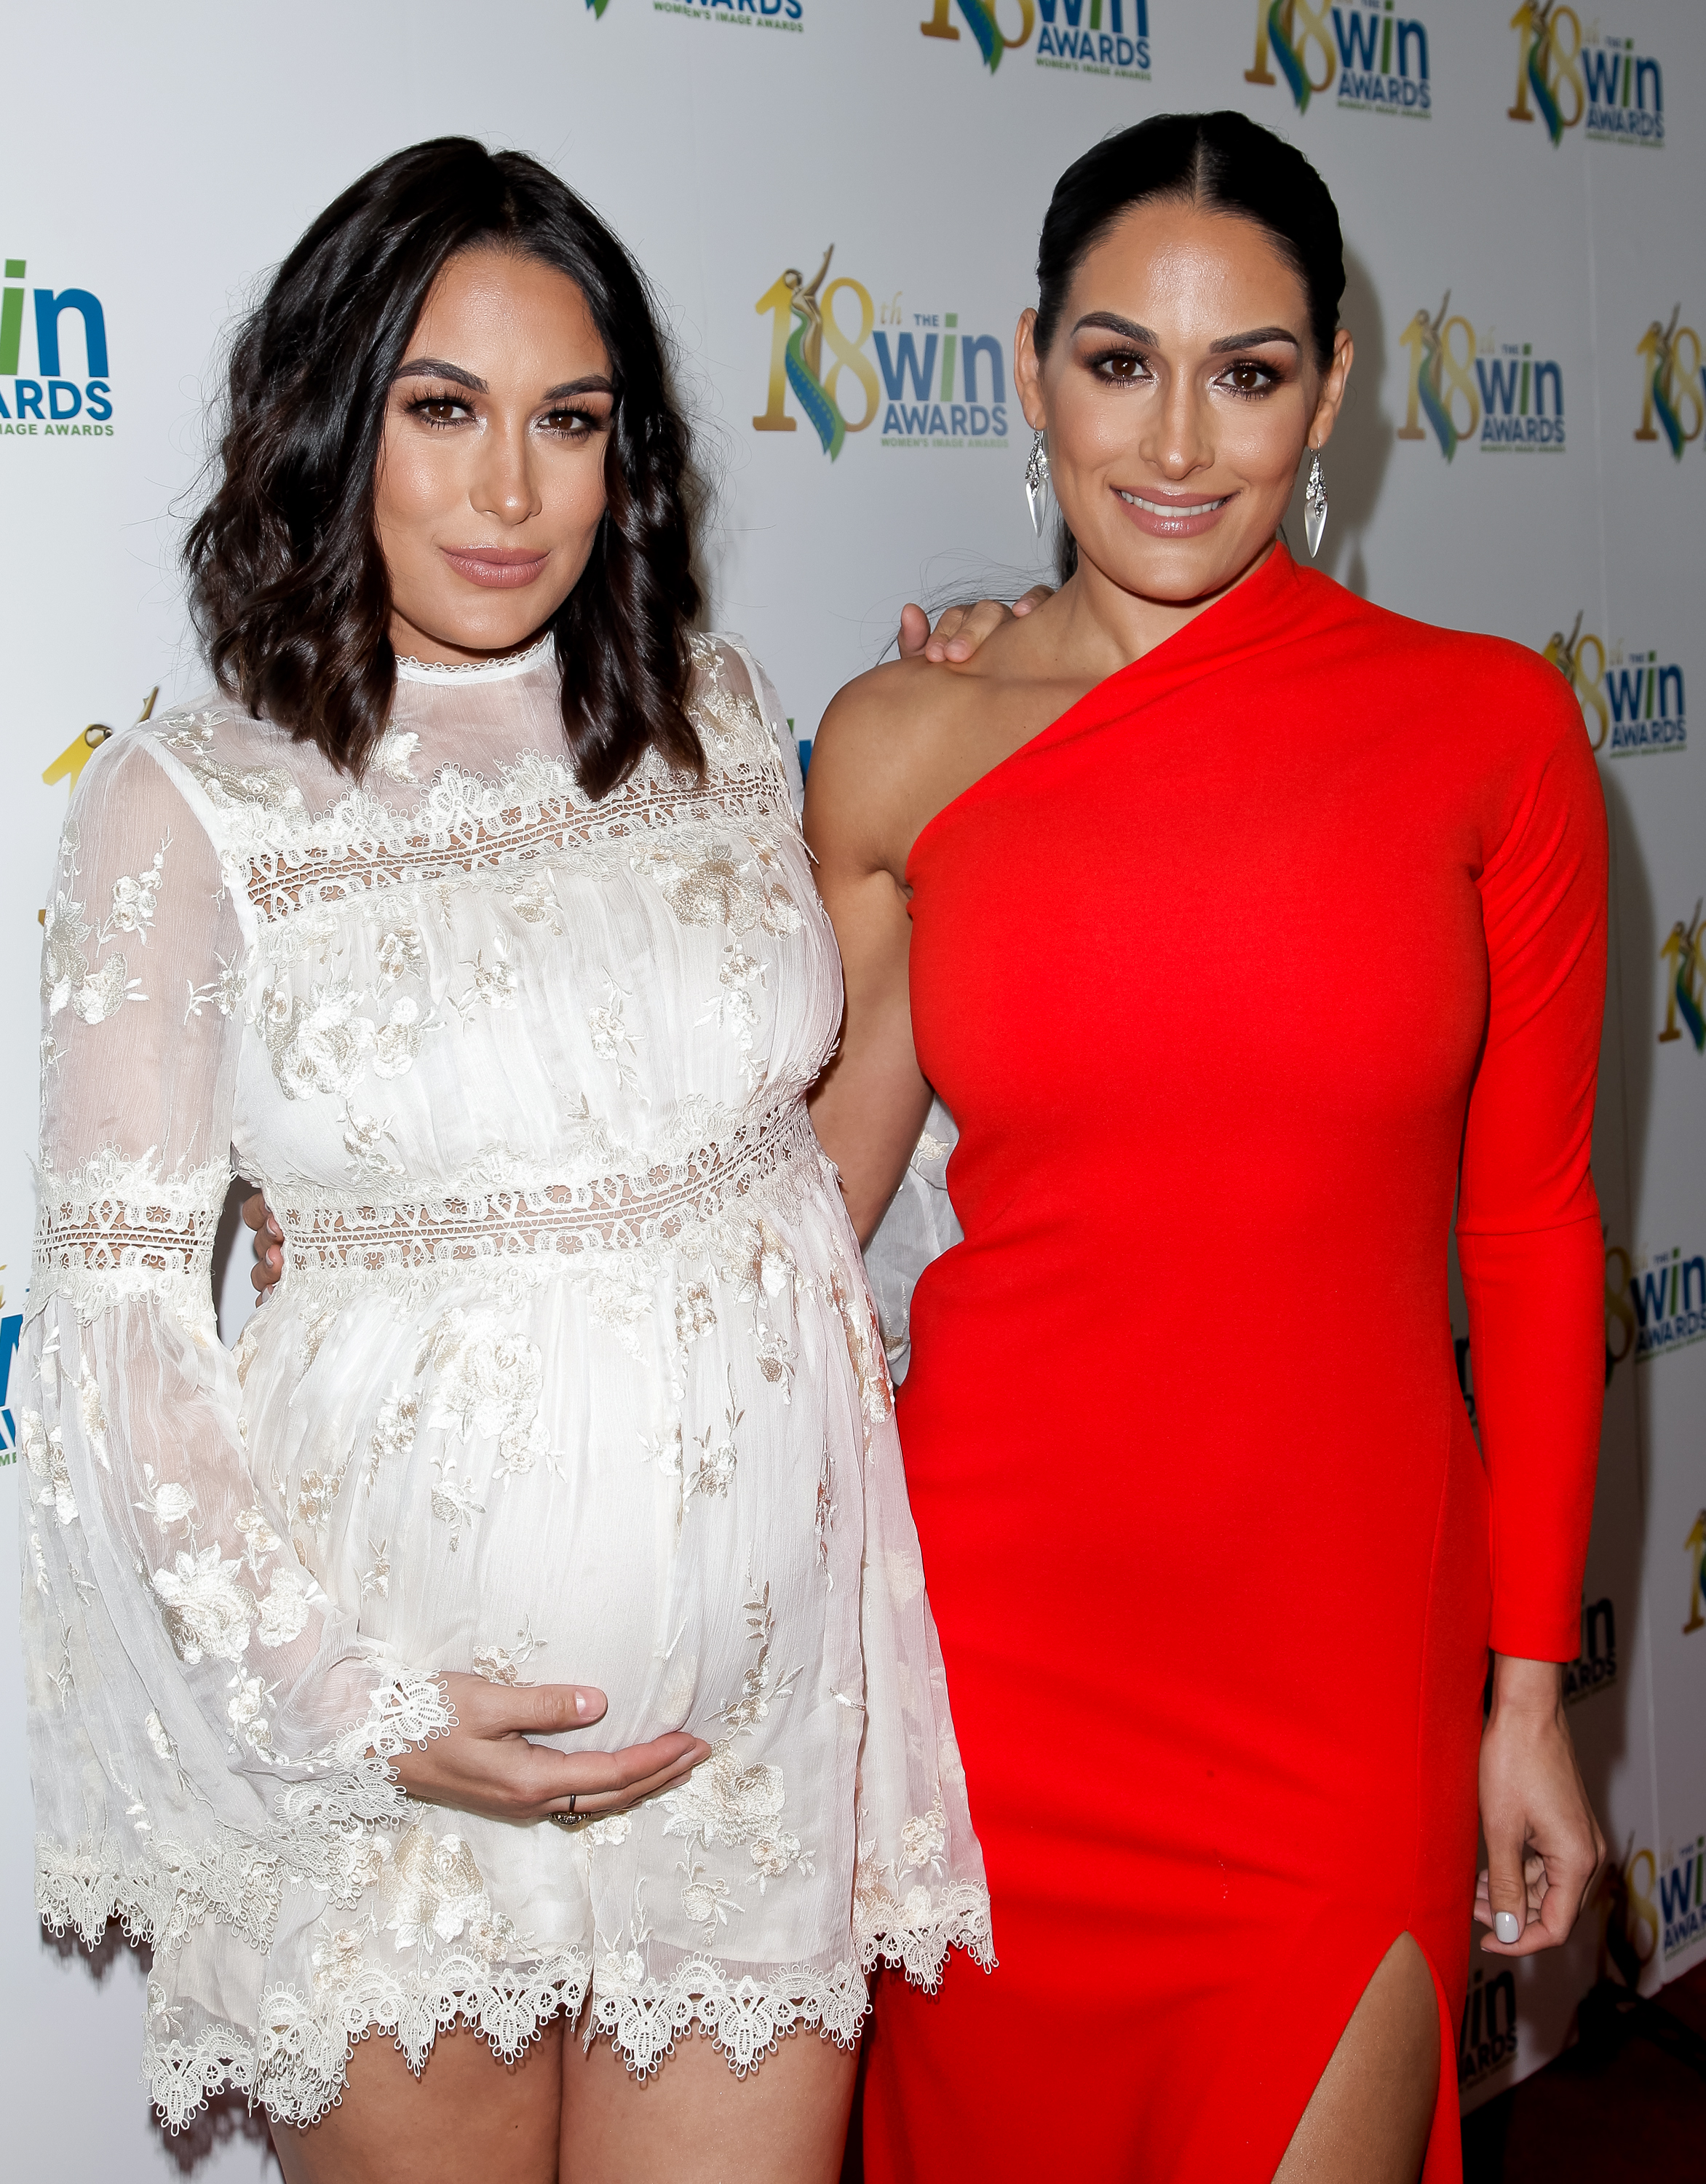 The Bella Twins Image Awards #1